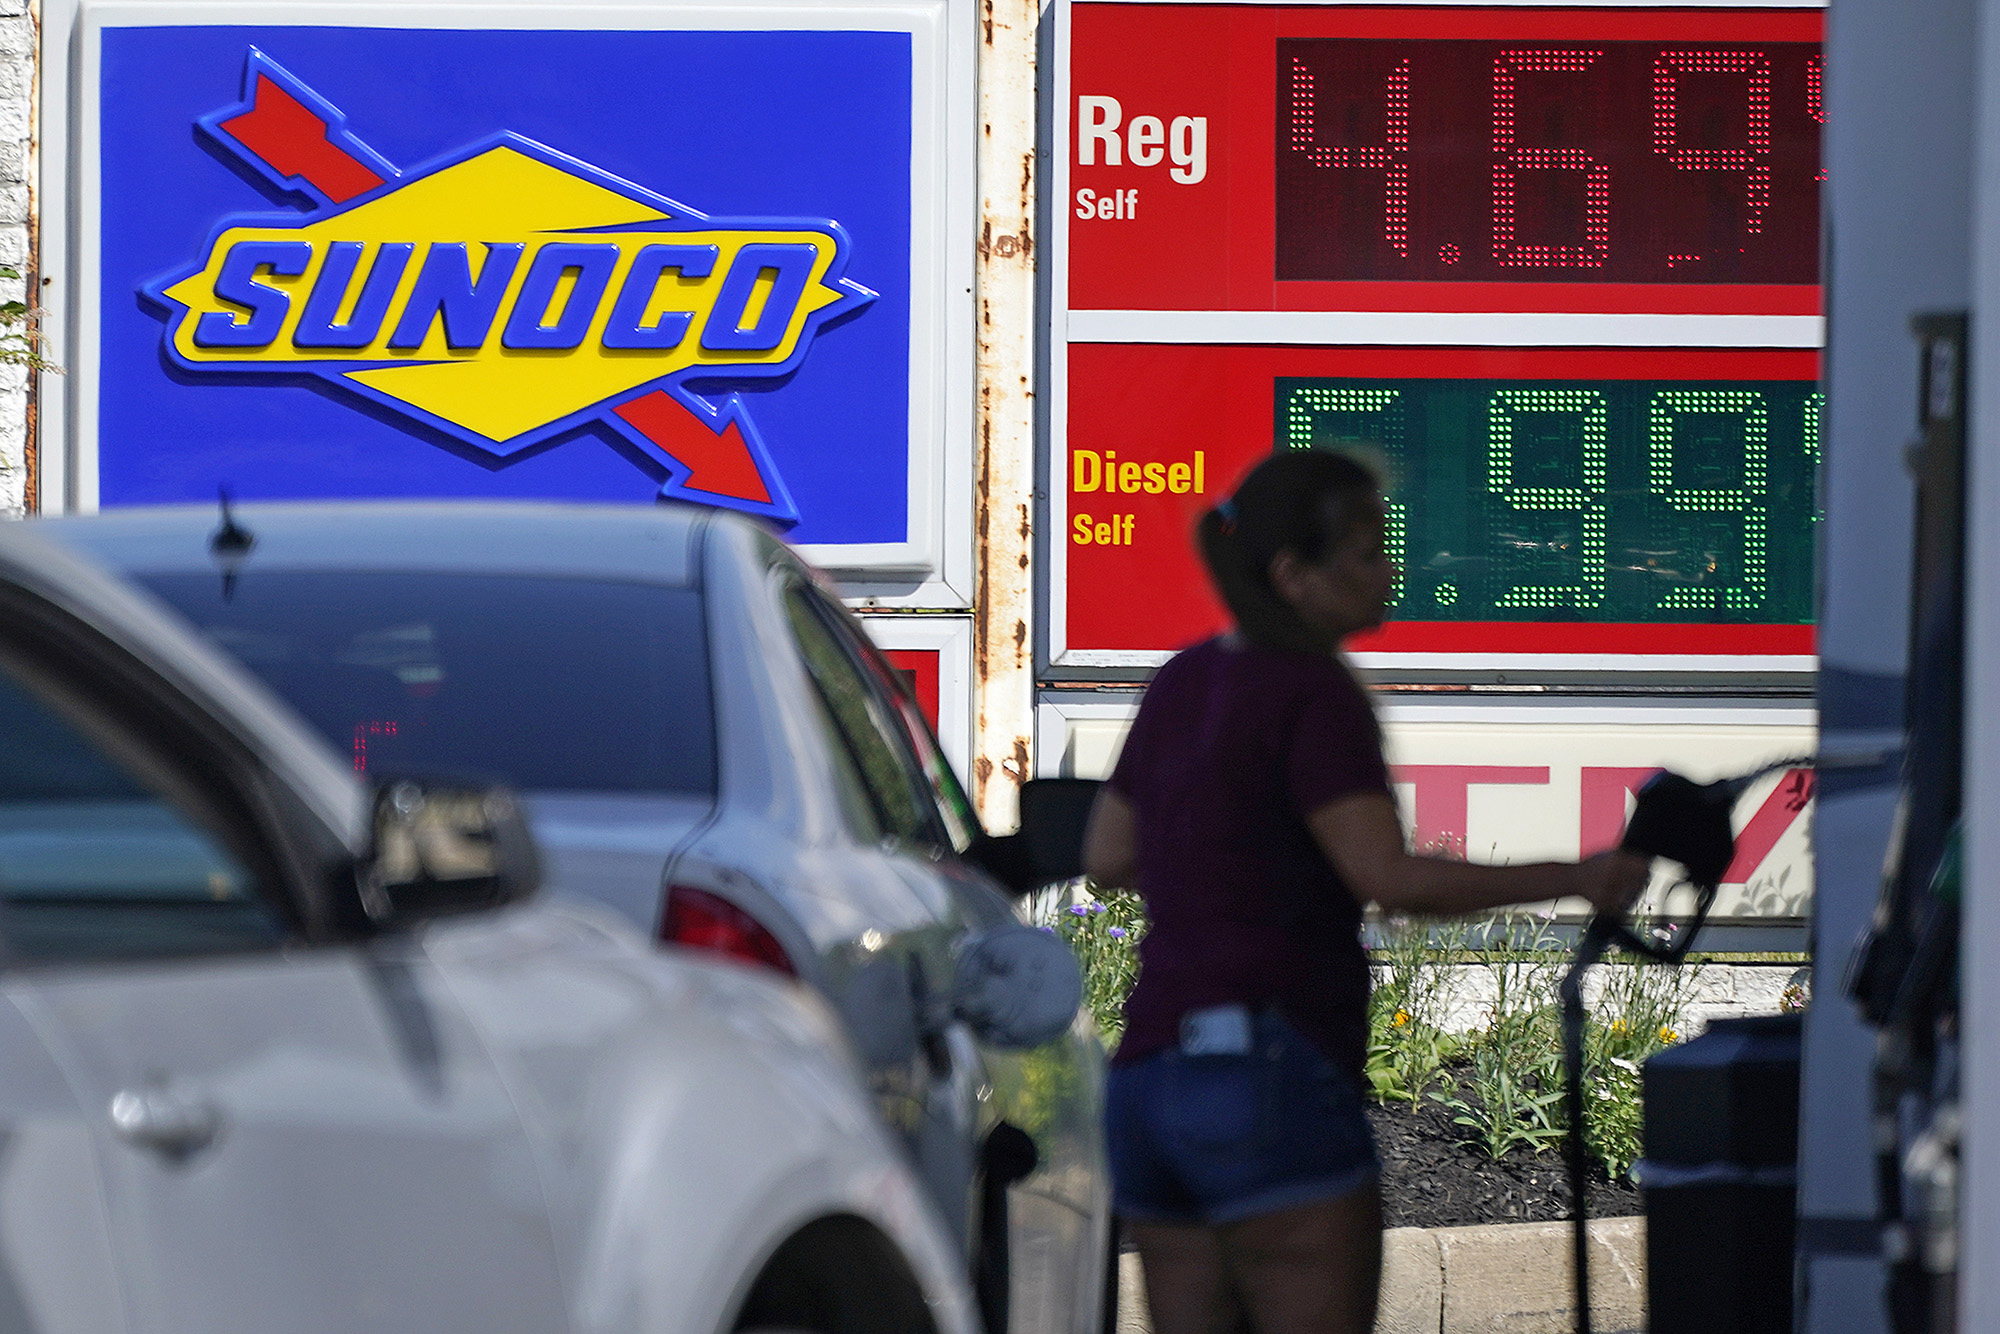 A woman pumps gas at a Sunoco mini-mart in Independence, Ohio, on July 12.